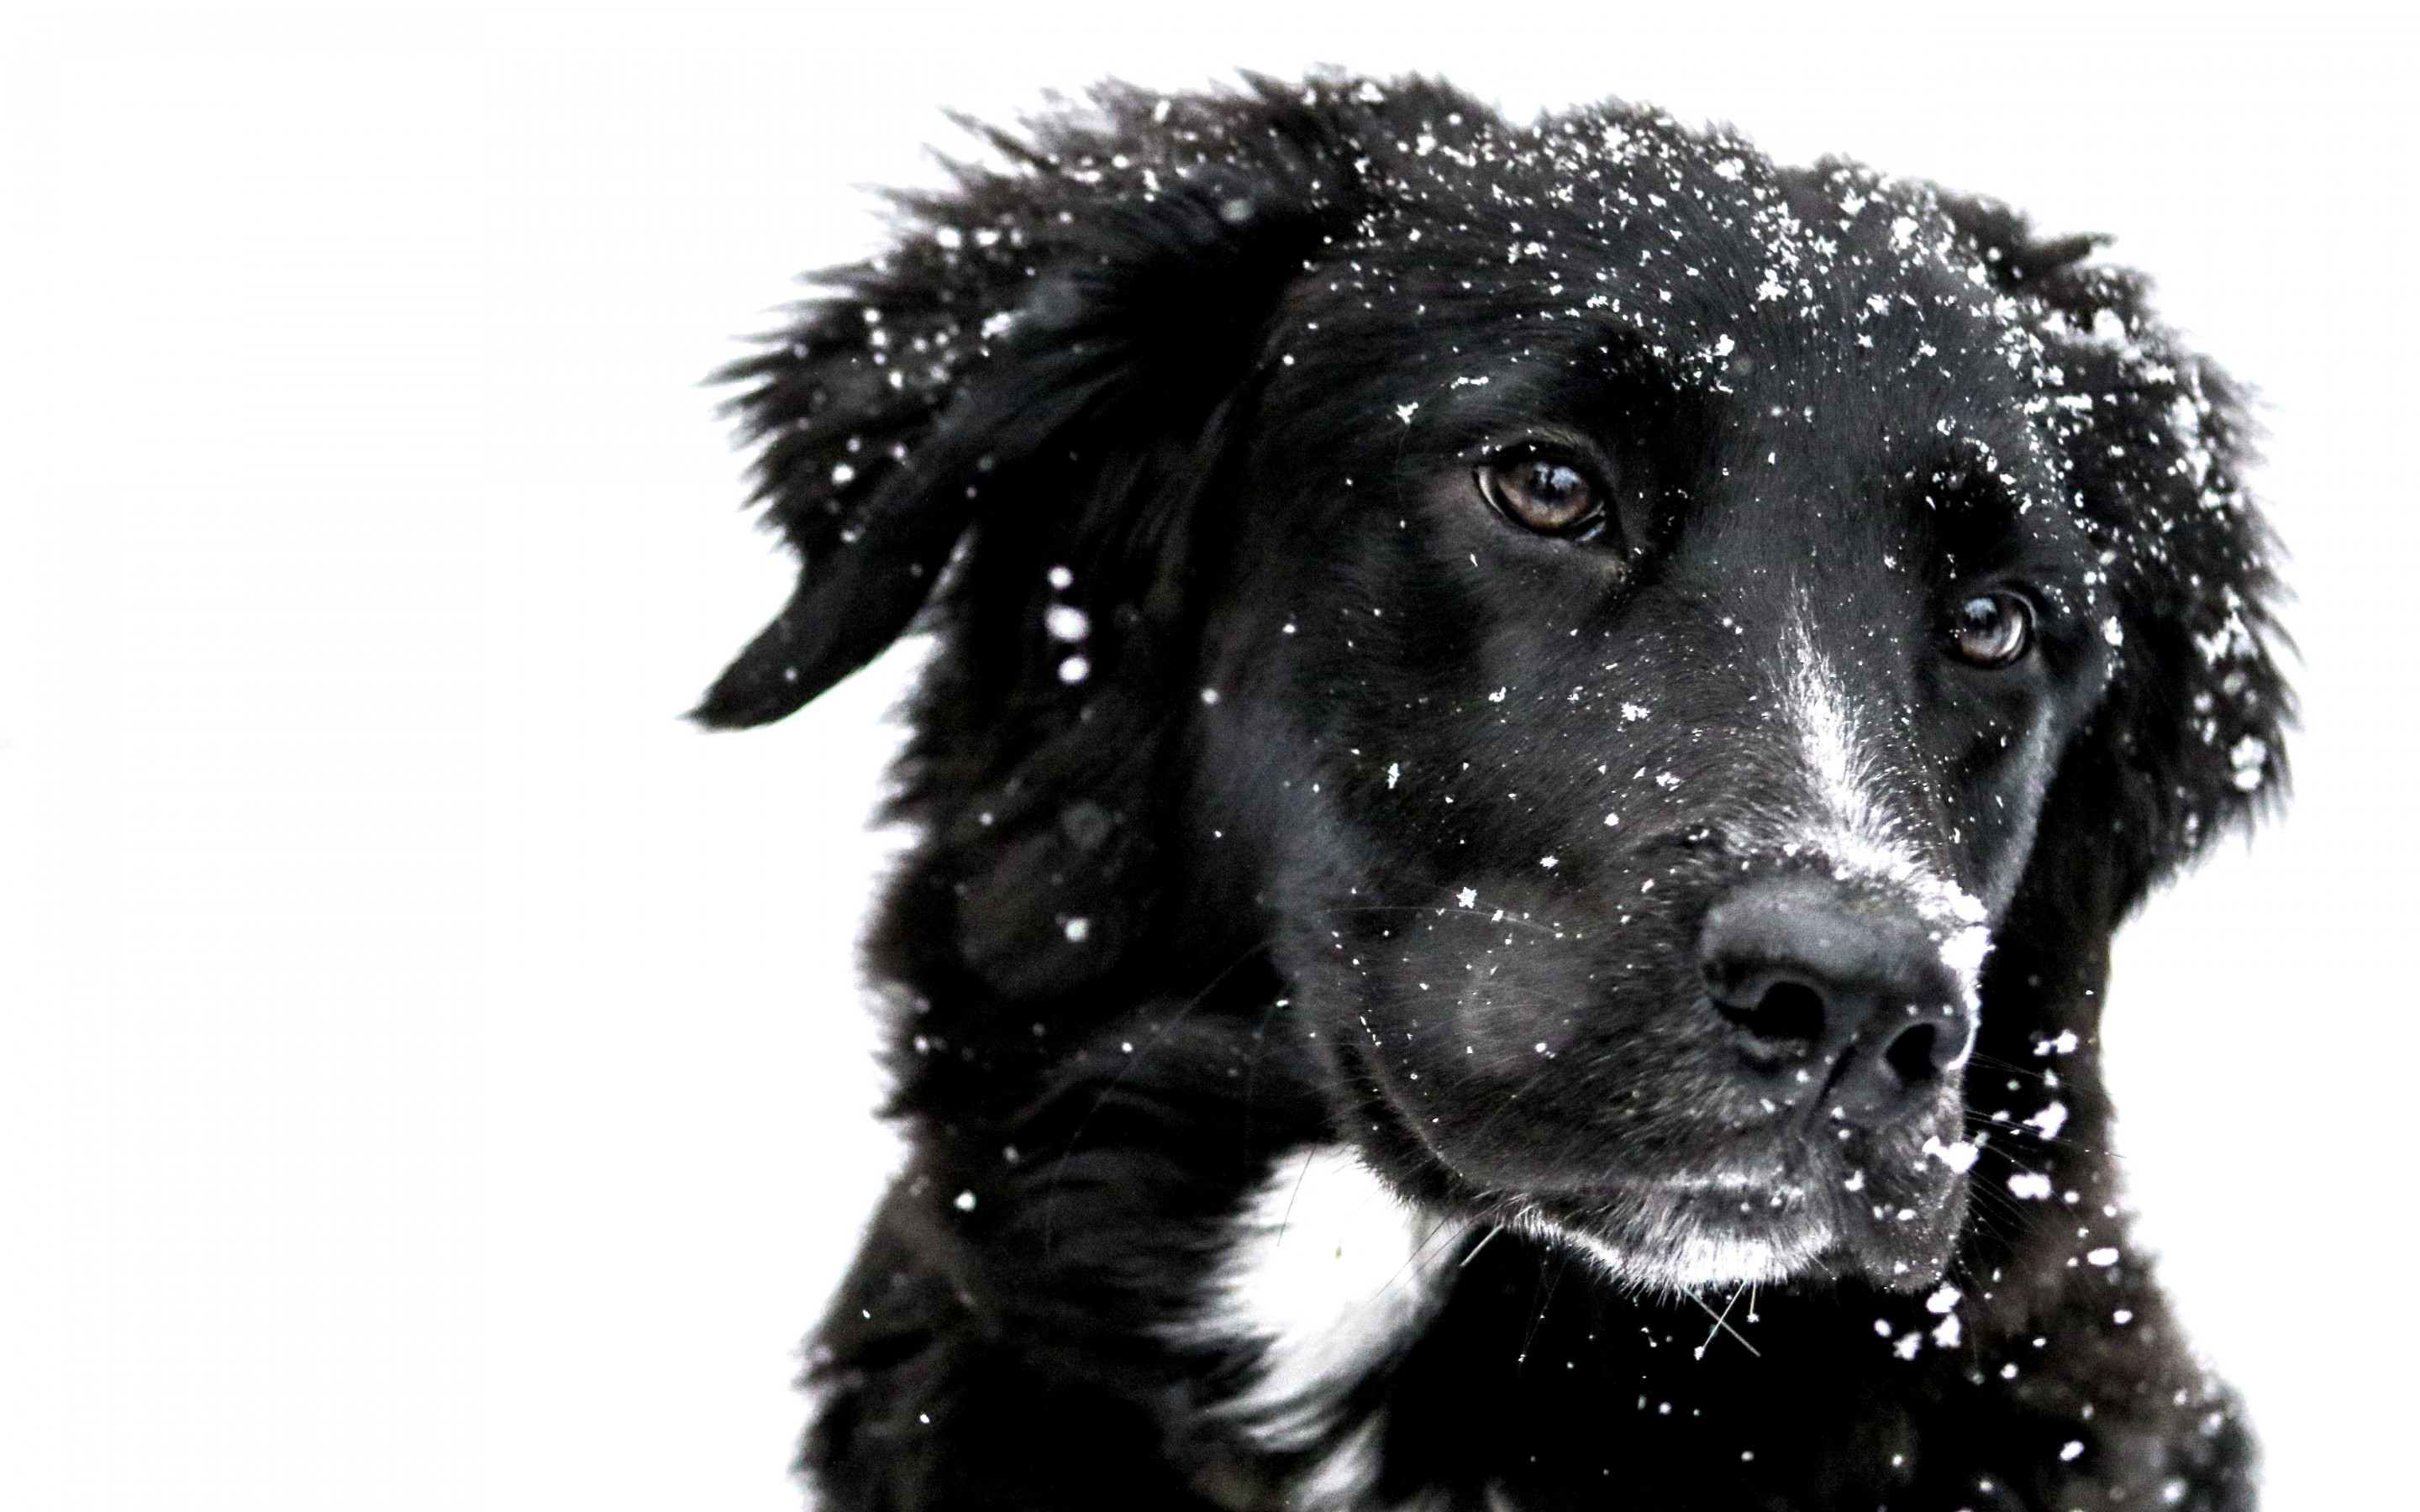 Snowing over the cute dog wallpaper 2880x1800